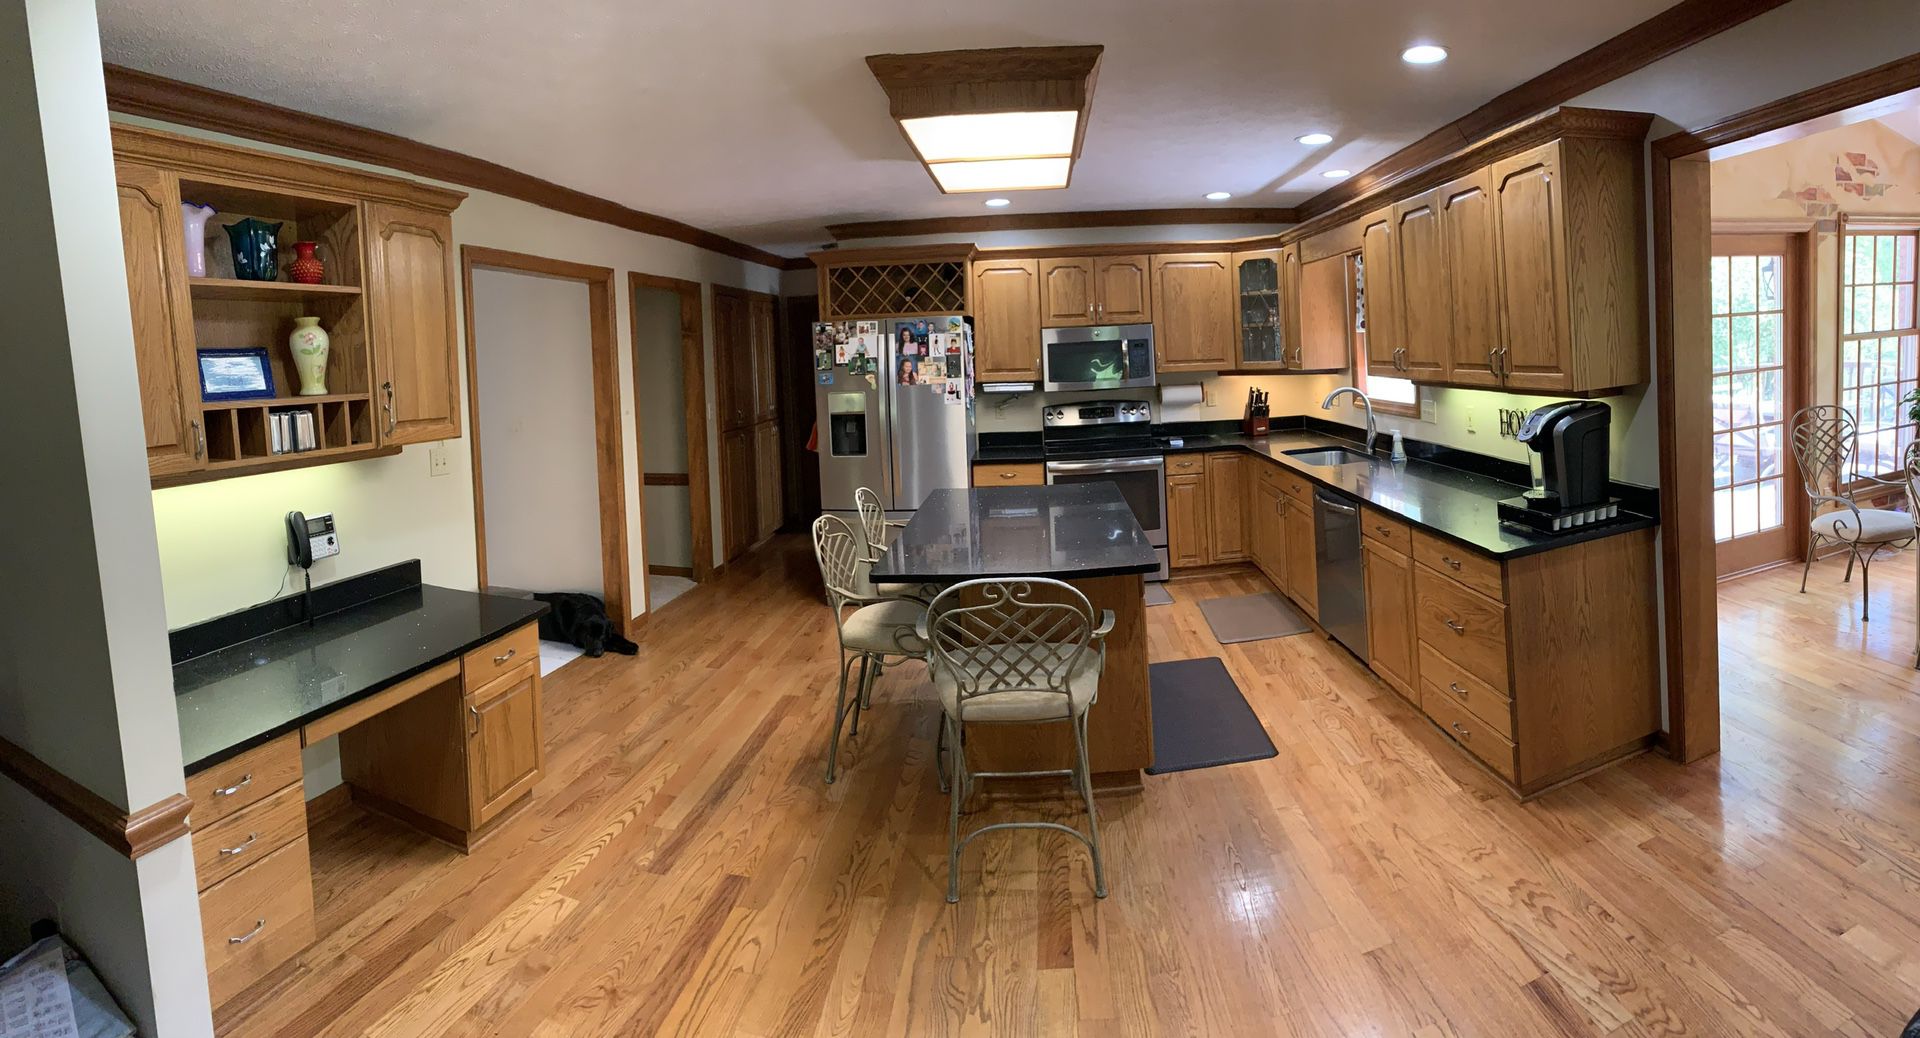 Used high quality kitchen cabinets w/ desk and island